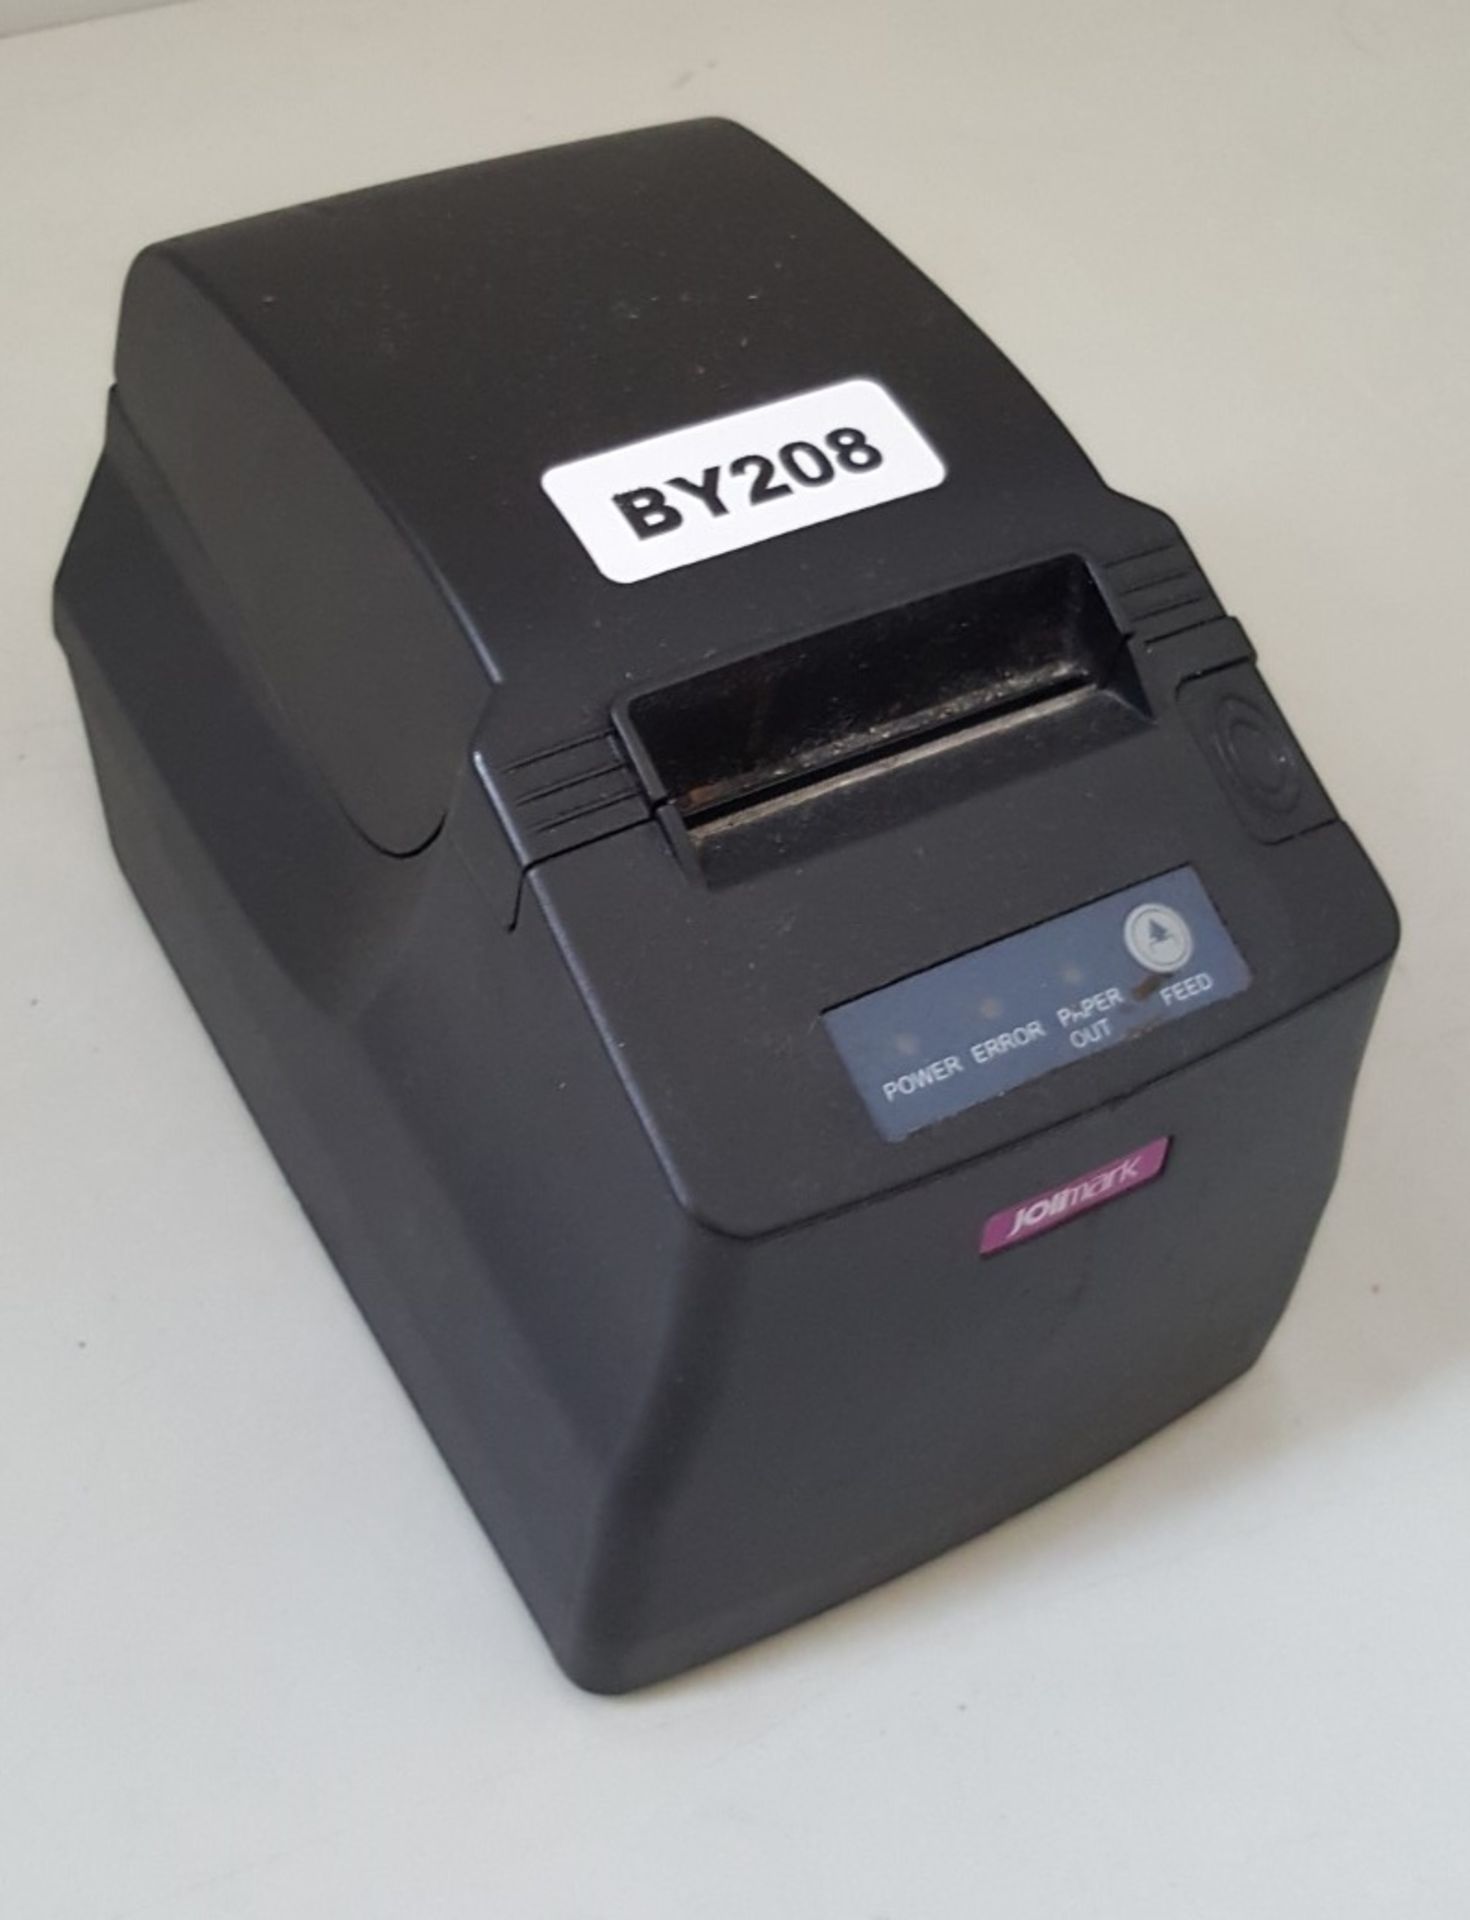 1 x Jolimark TP510 Thermal Printer With Bluetooth & USB interface - Ref BY208